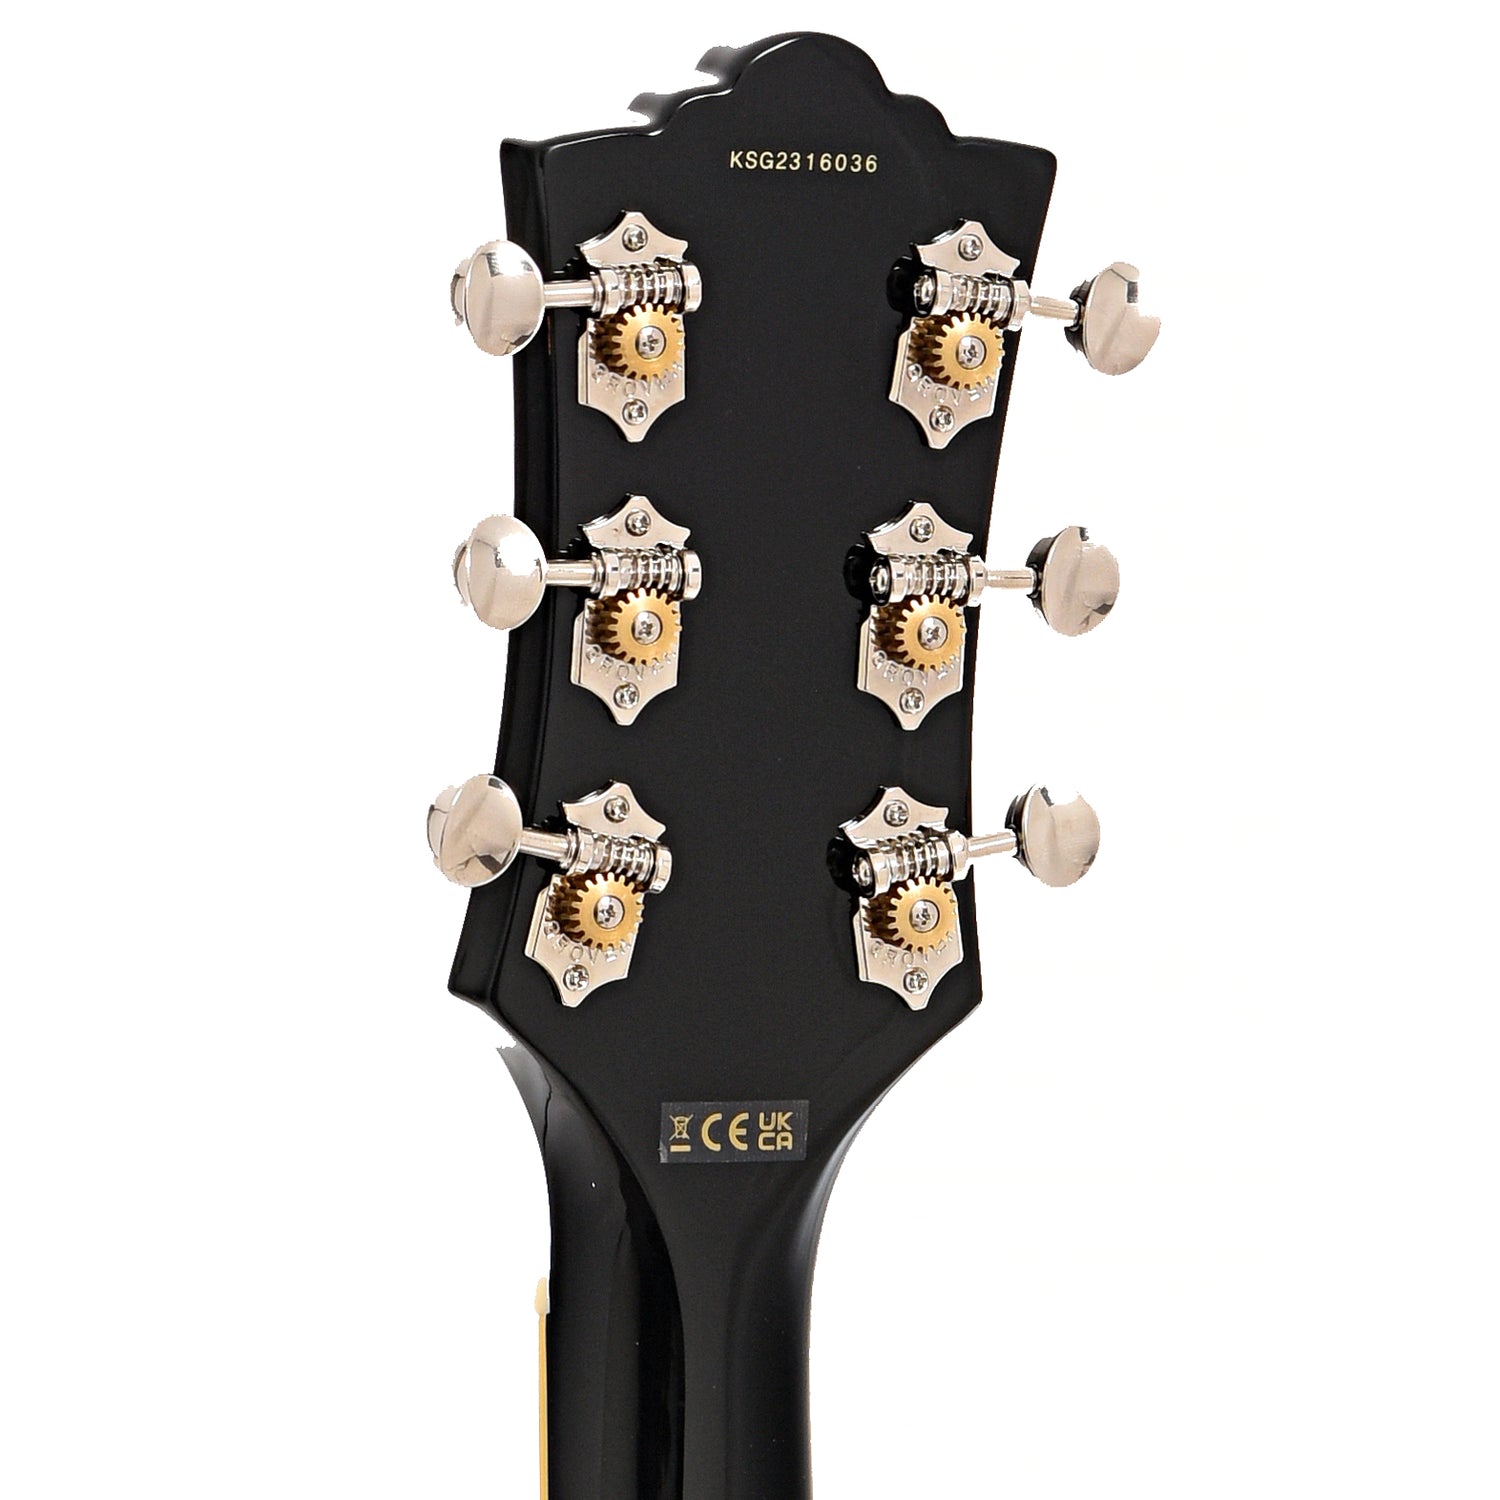 back headstock of Guild Newark St. Collection M-75 Aristocrat Hollow Body Archtop Guitar, Limited Edition Black Finish